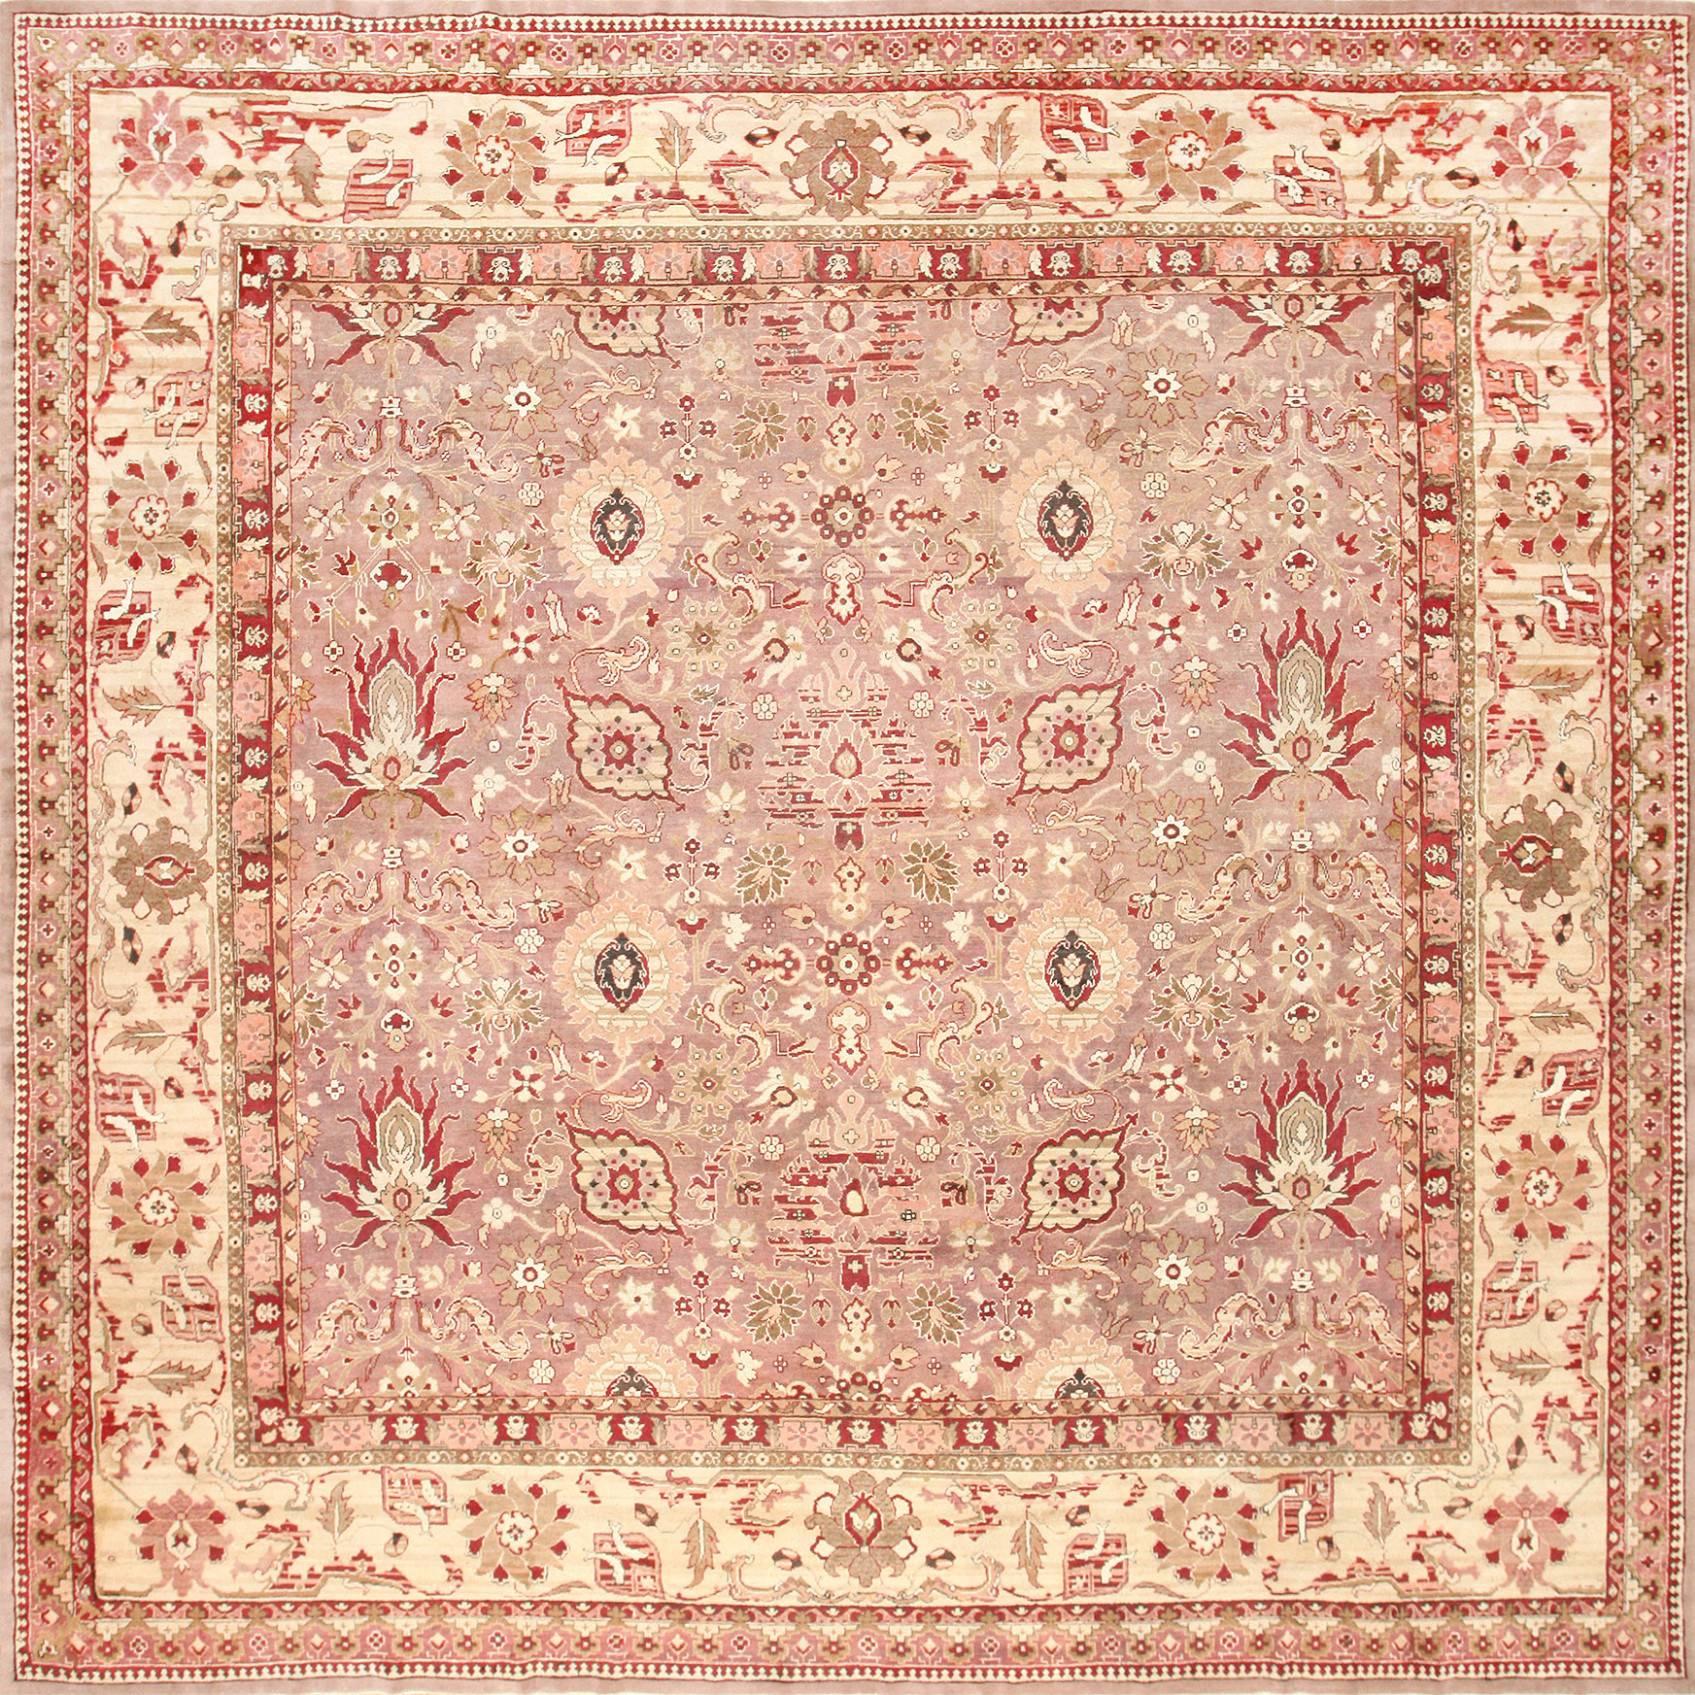 Large Square Antique Indian Agra Rug. Size: 13 ft 6 in x 13 ft 6 in